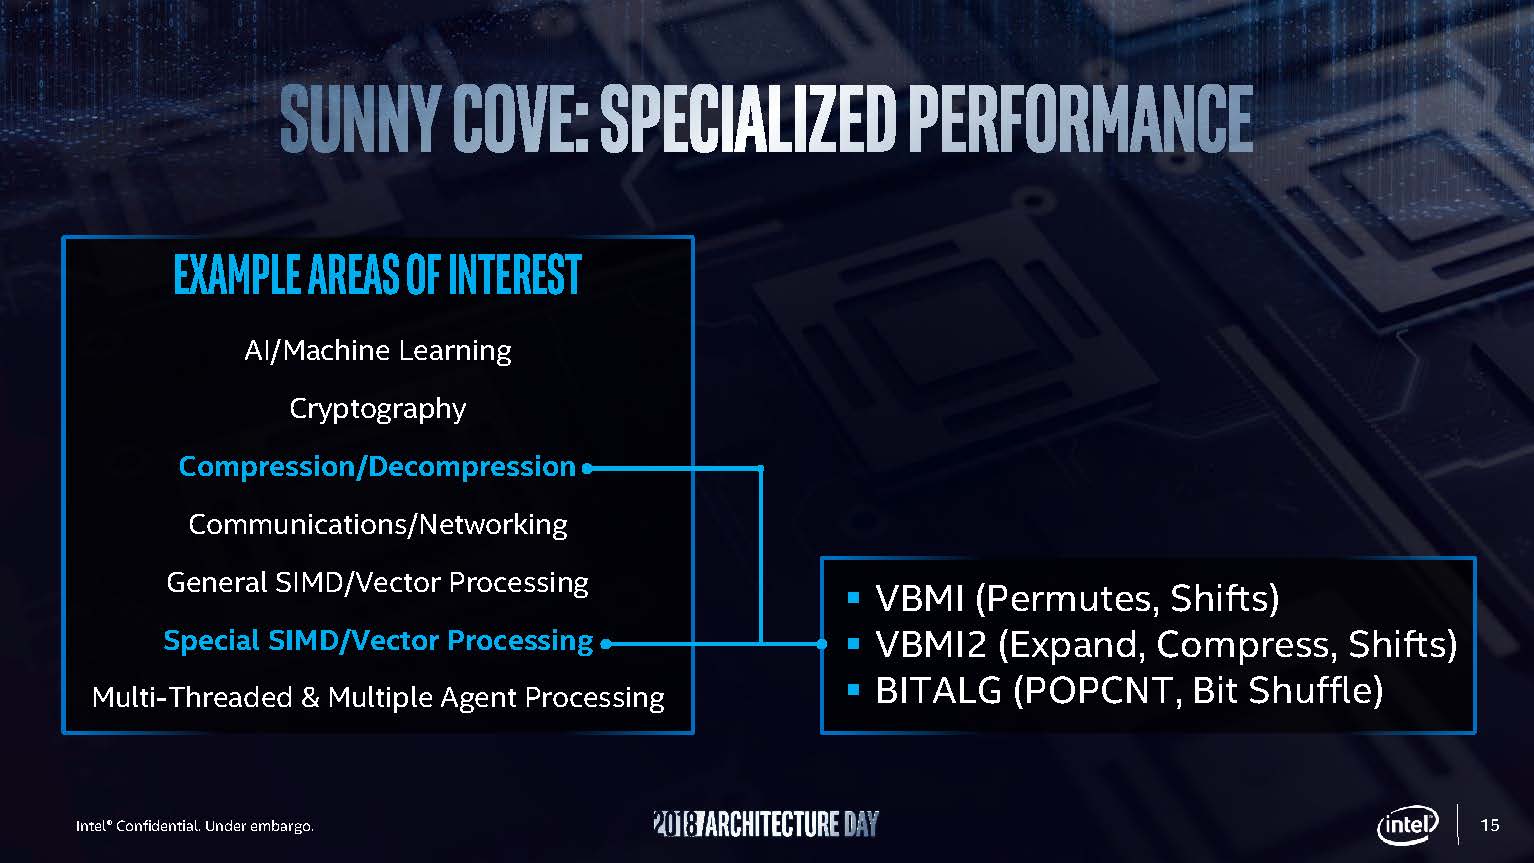 Intel Sunny Cove Specialized Performance 2